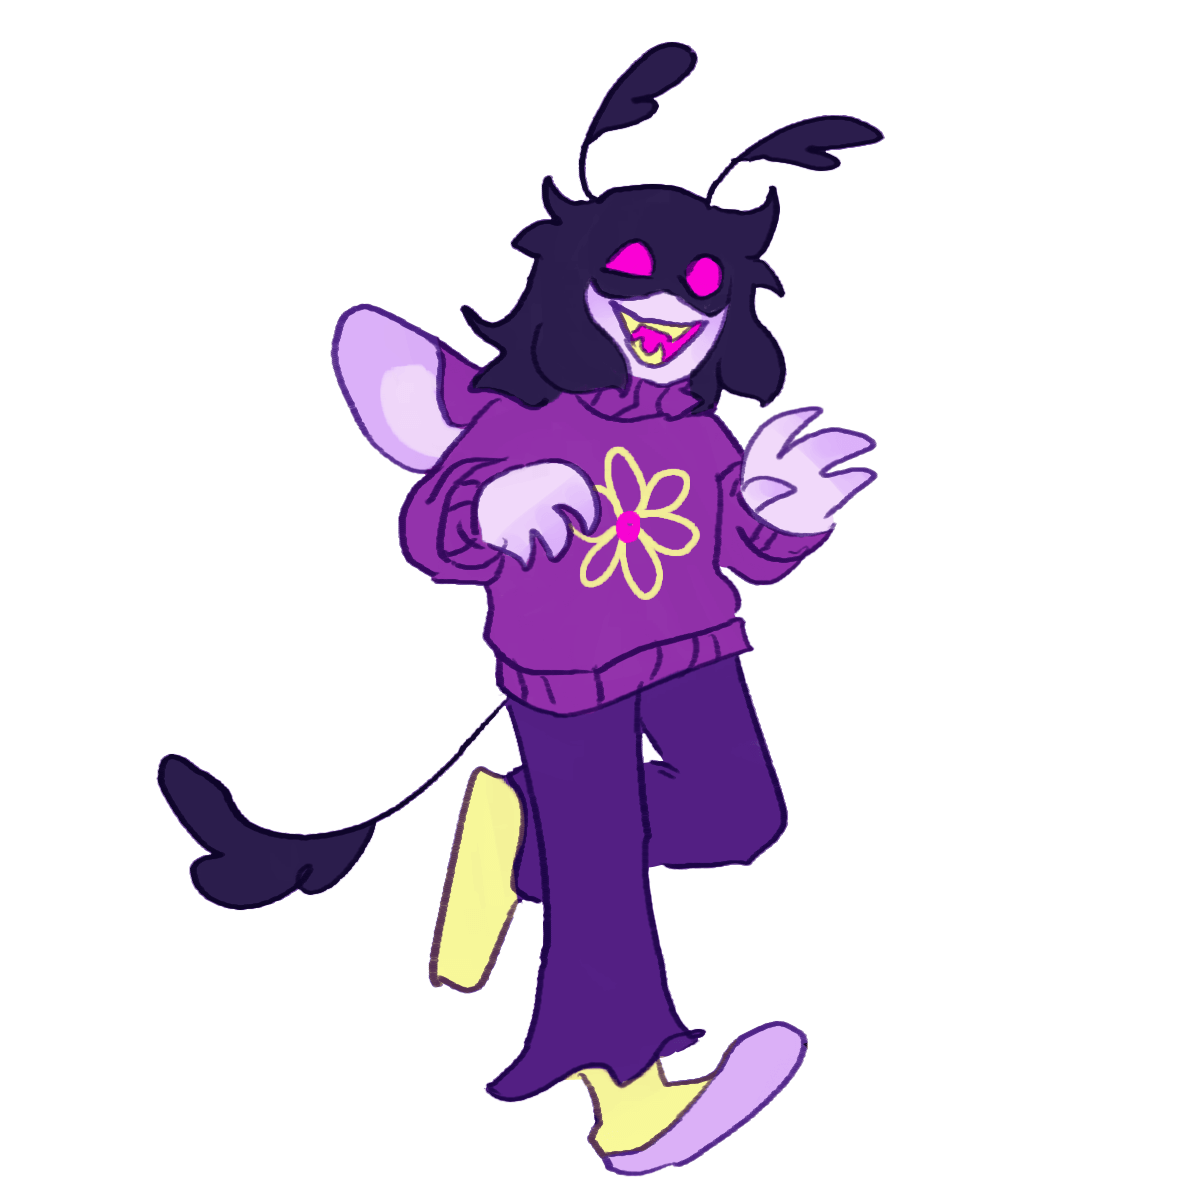 a picture of an inchling, a small bug-like humanoid, with pale purple skin, dark hair, and magenta eyes. they are wearing clothes in various shades of purple and yellow.